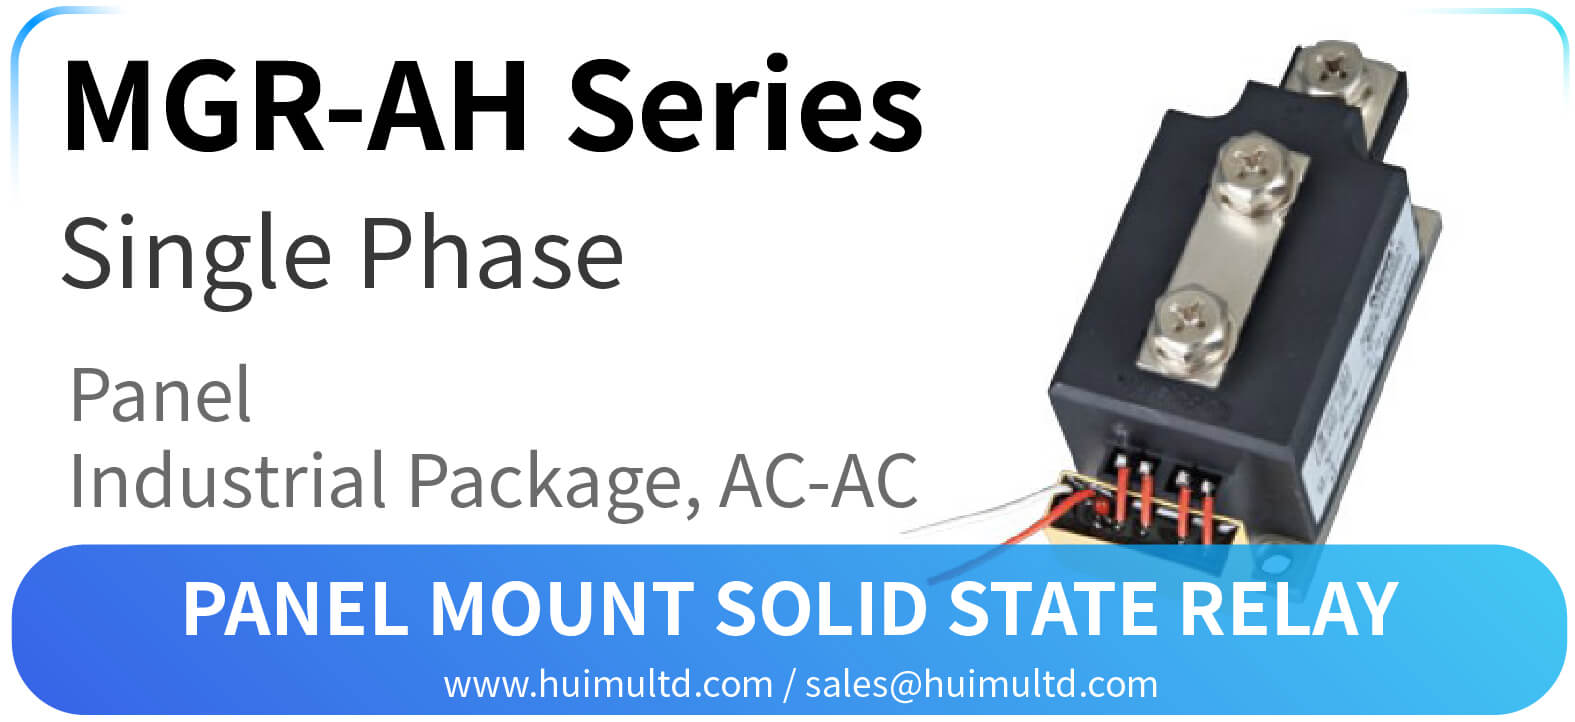 MGR-AH Series Panel Mount Solid State Relay